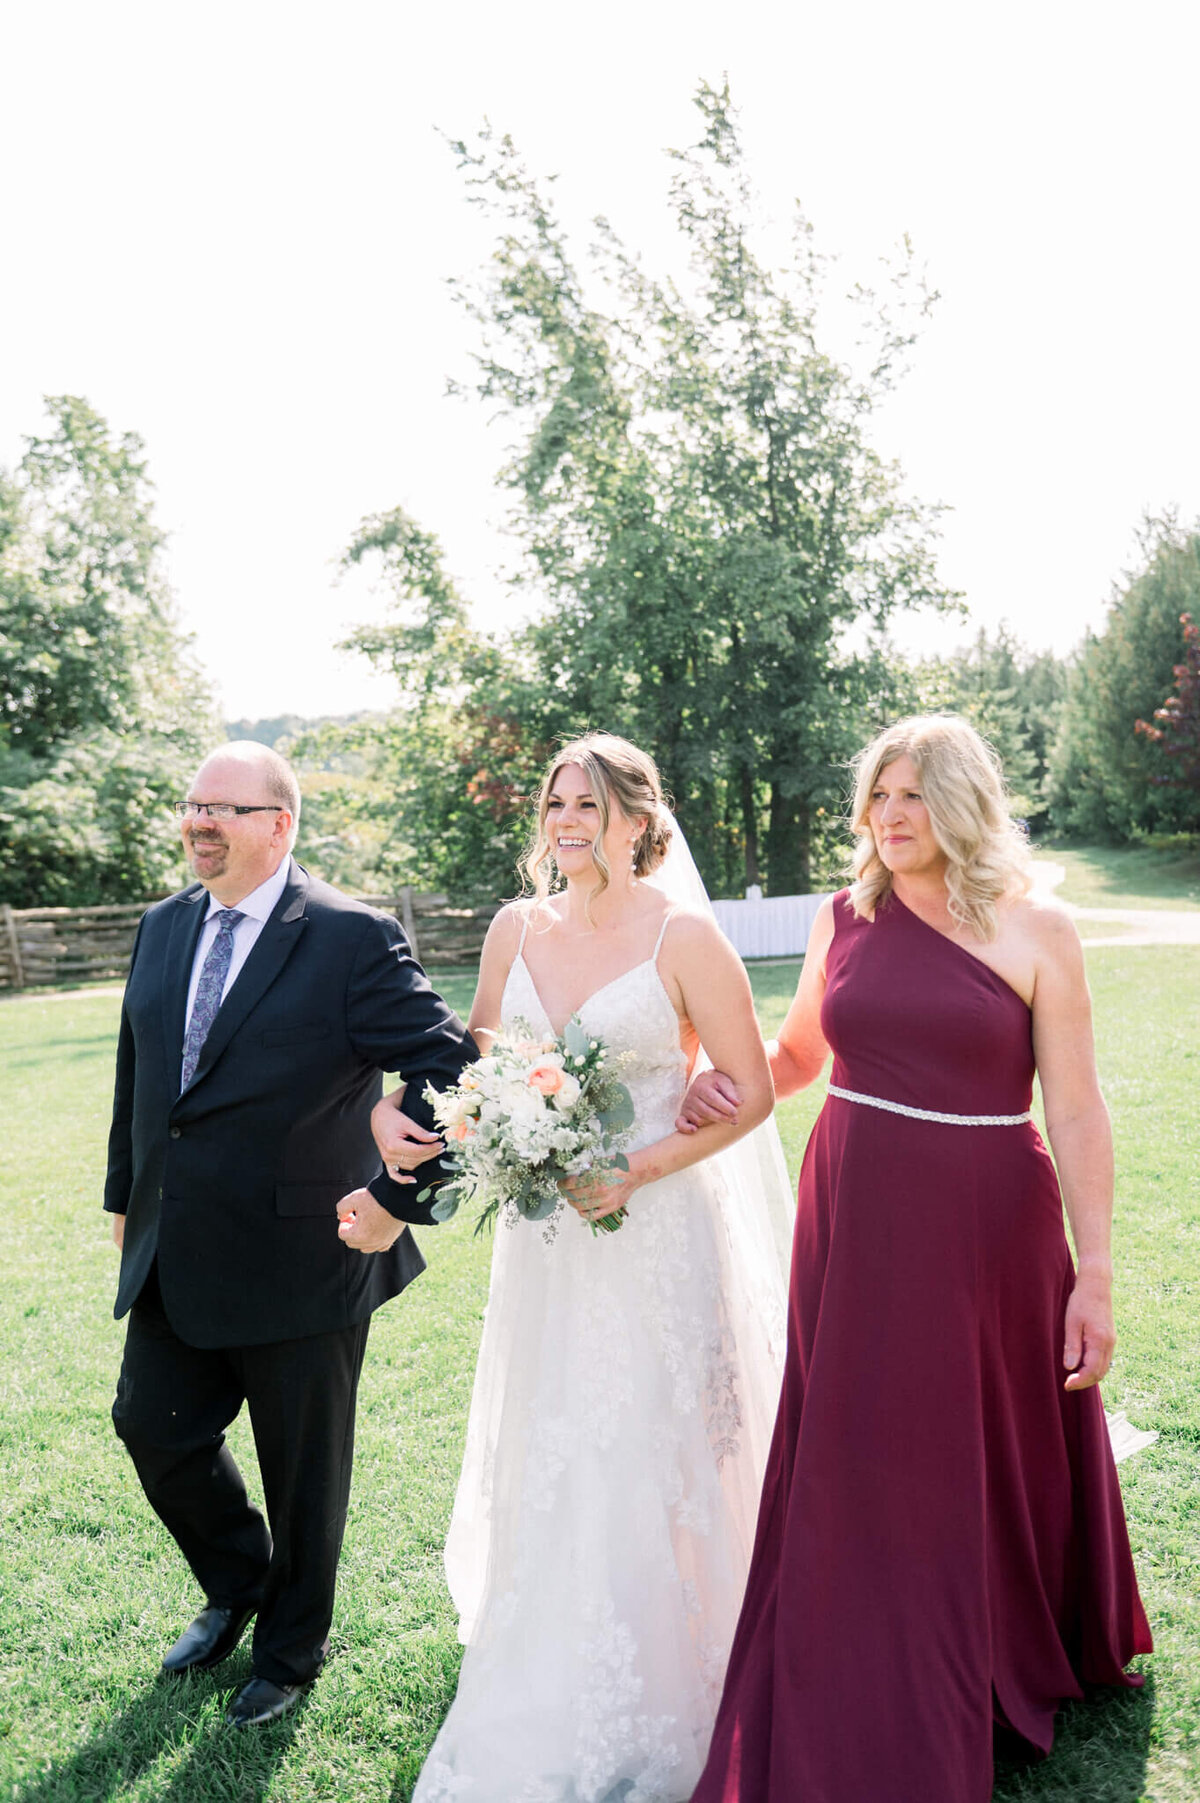 Bride walking down the aisle with parents captured by Niagara wedding photographer